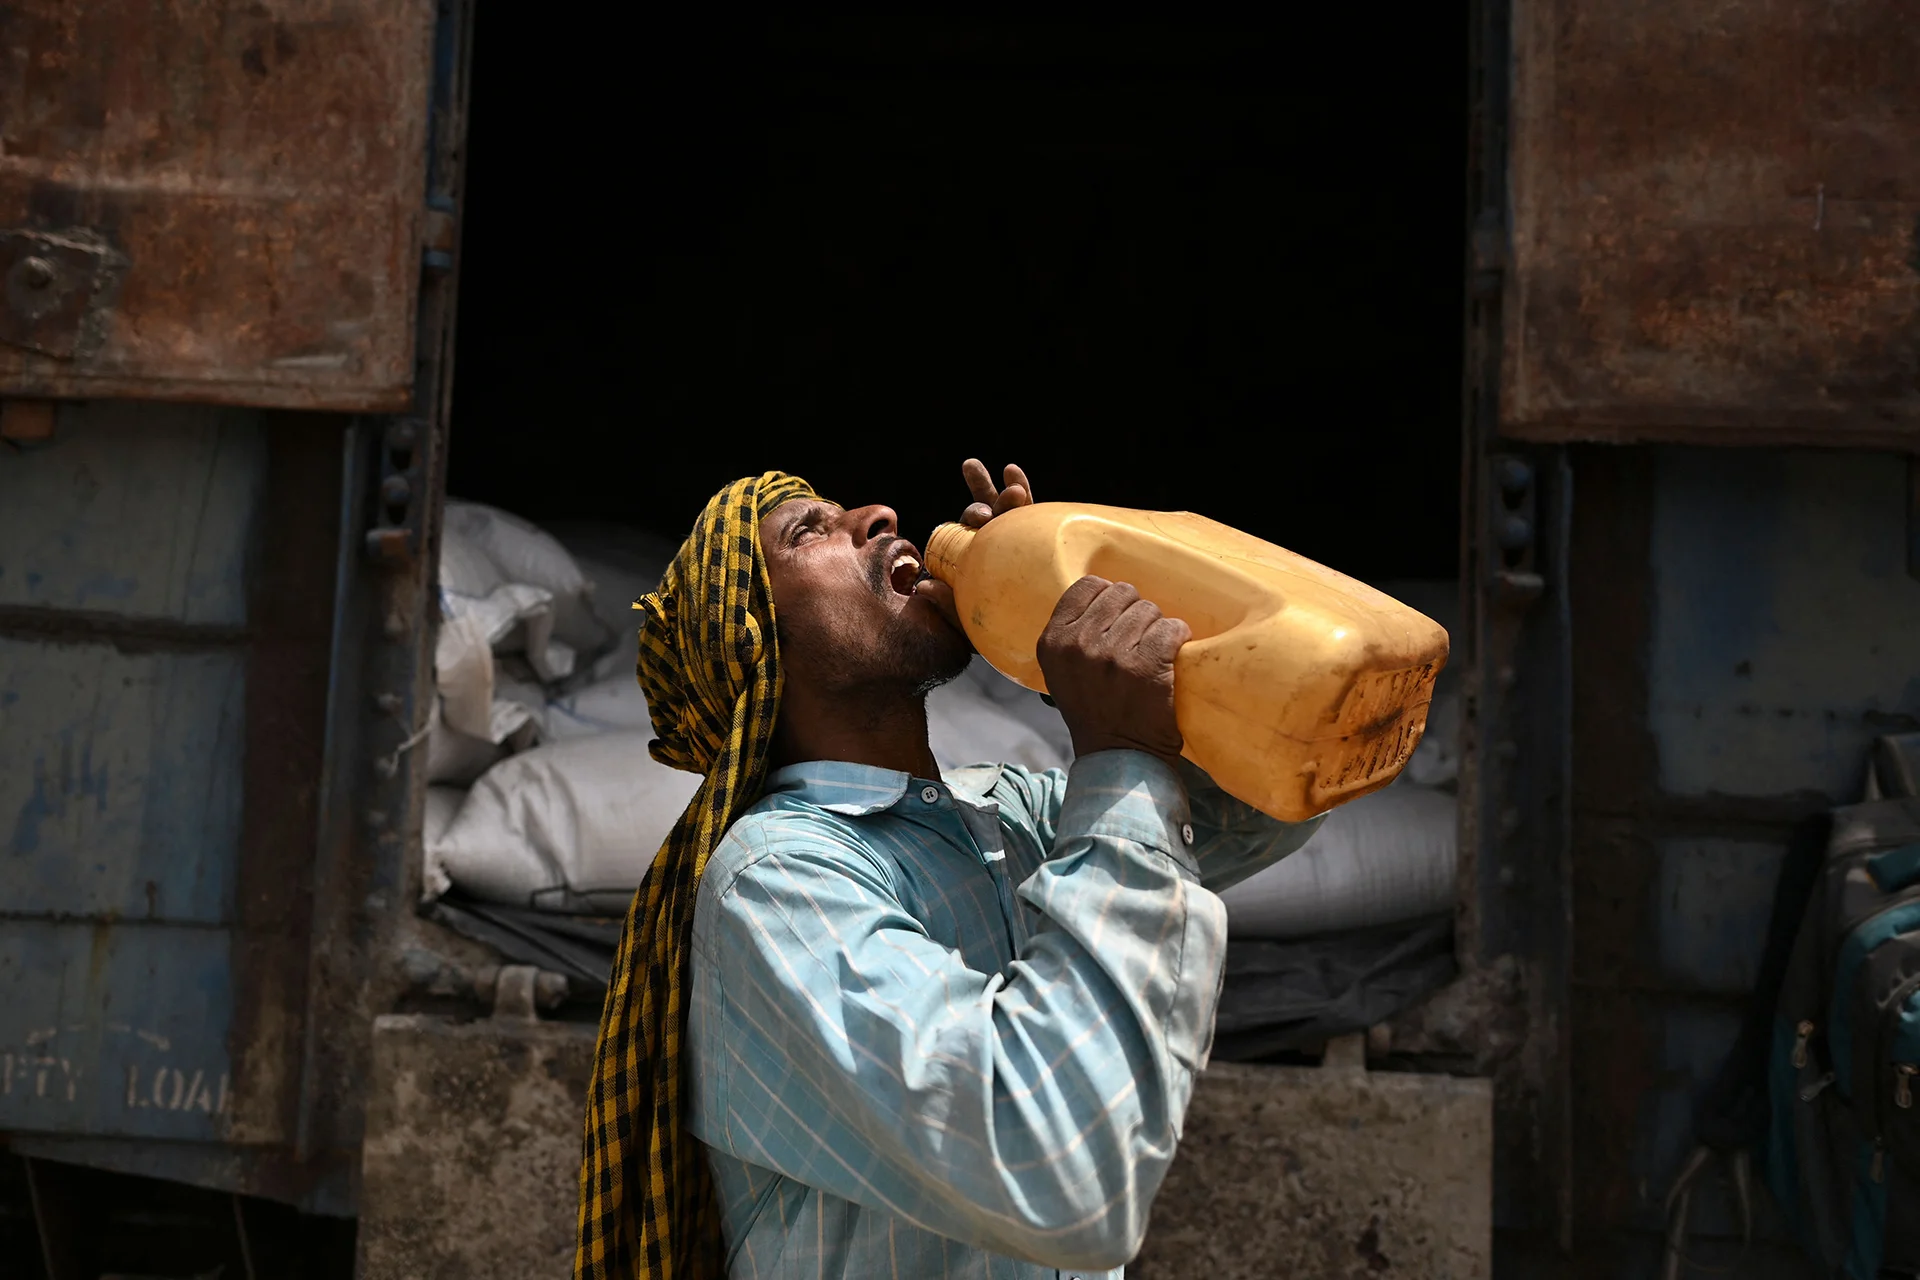 A worker drinks water during a break from loading sacks of wheat on a freight train at Chawa Pail railway station in Khanna, Punjab state, India on May 19, 2022. The world's second-largest producer of wheat, on May 14 announced it would ban exports without special authorization from the government in the face of falling production caused primarily by an extreme heat wave. (Sajjad Hussain/ AFP/ Getty Images)